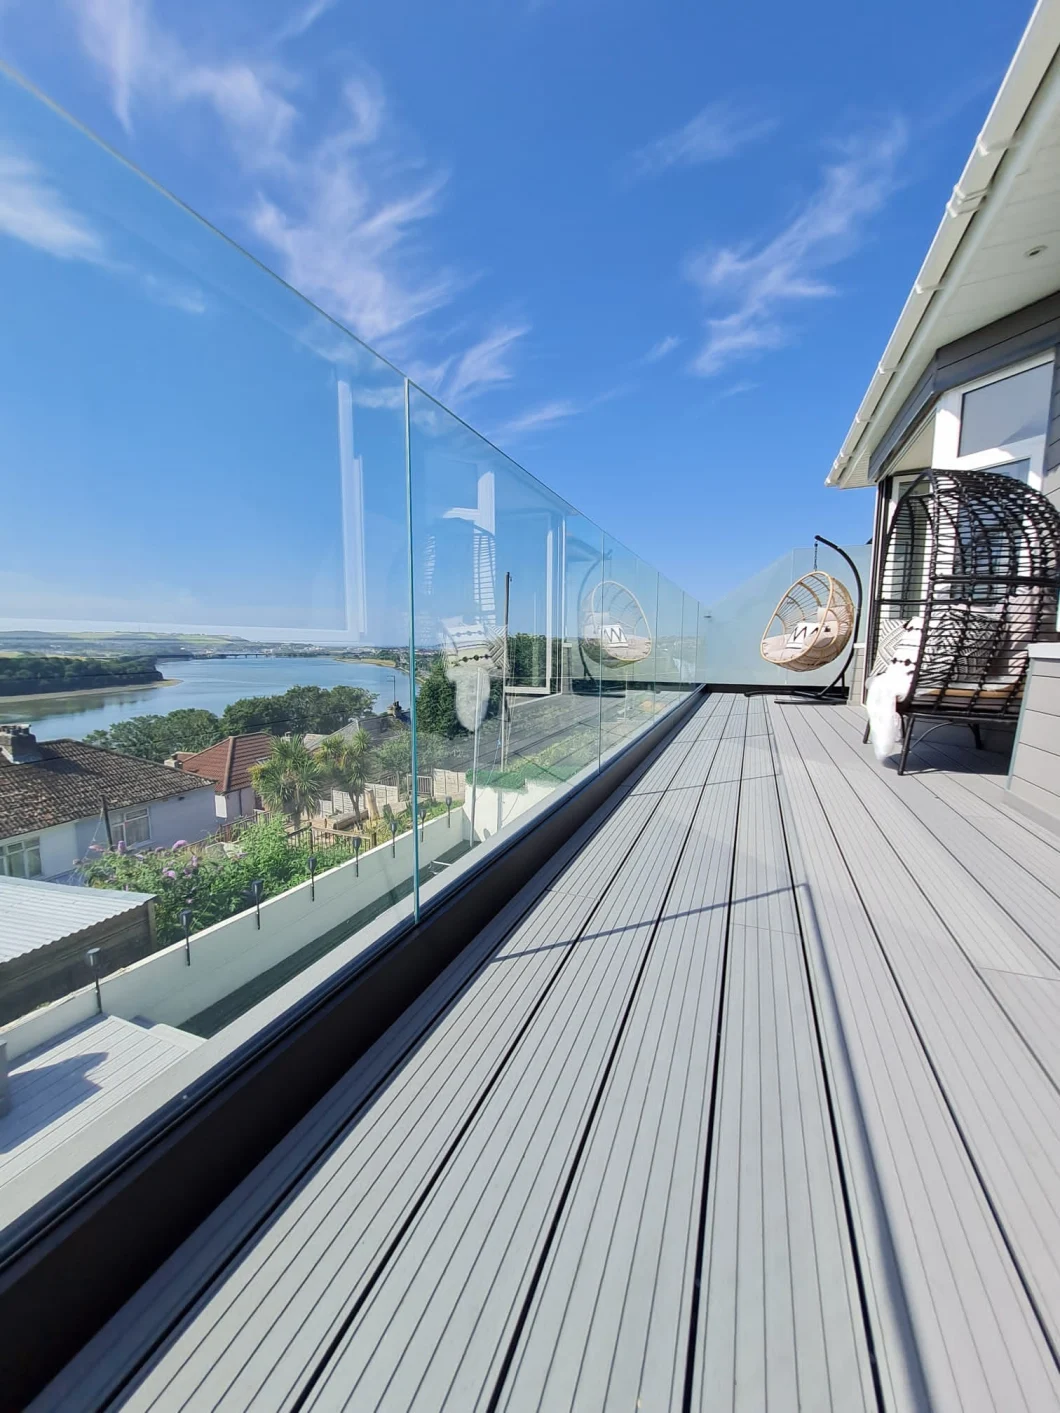 Frameless Aluminium Glass Deck Balustrades and Railings for Balcony Banisters System Price